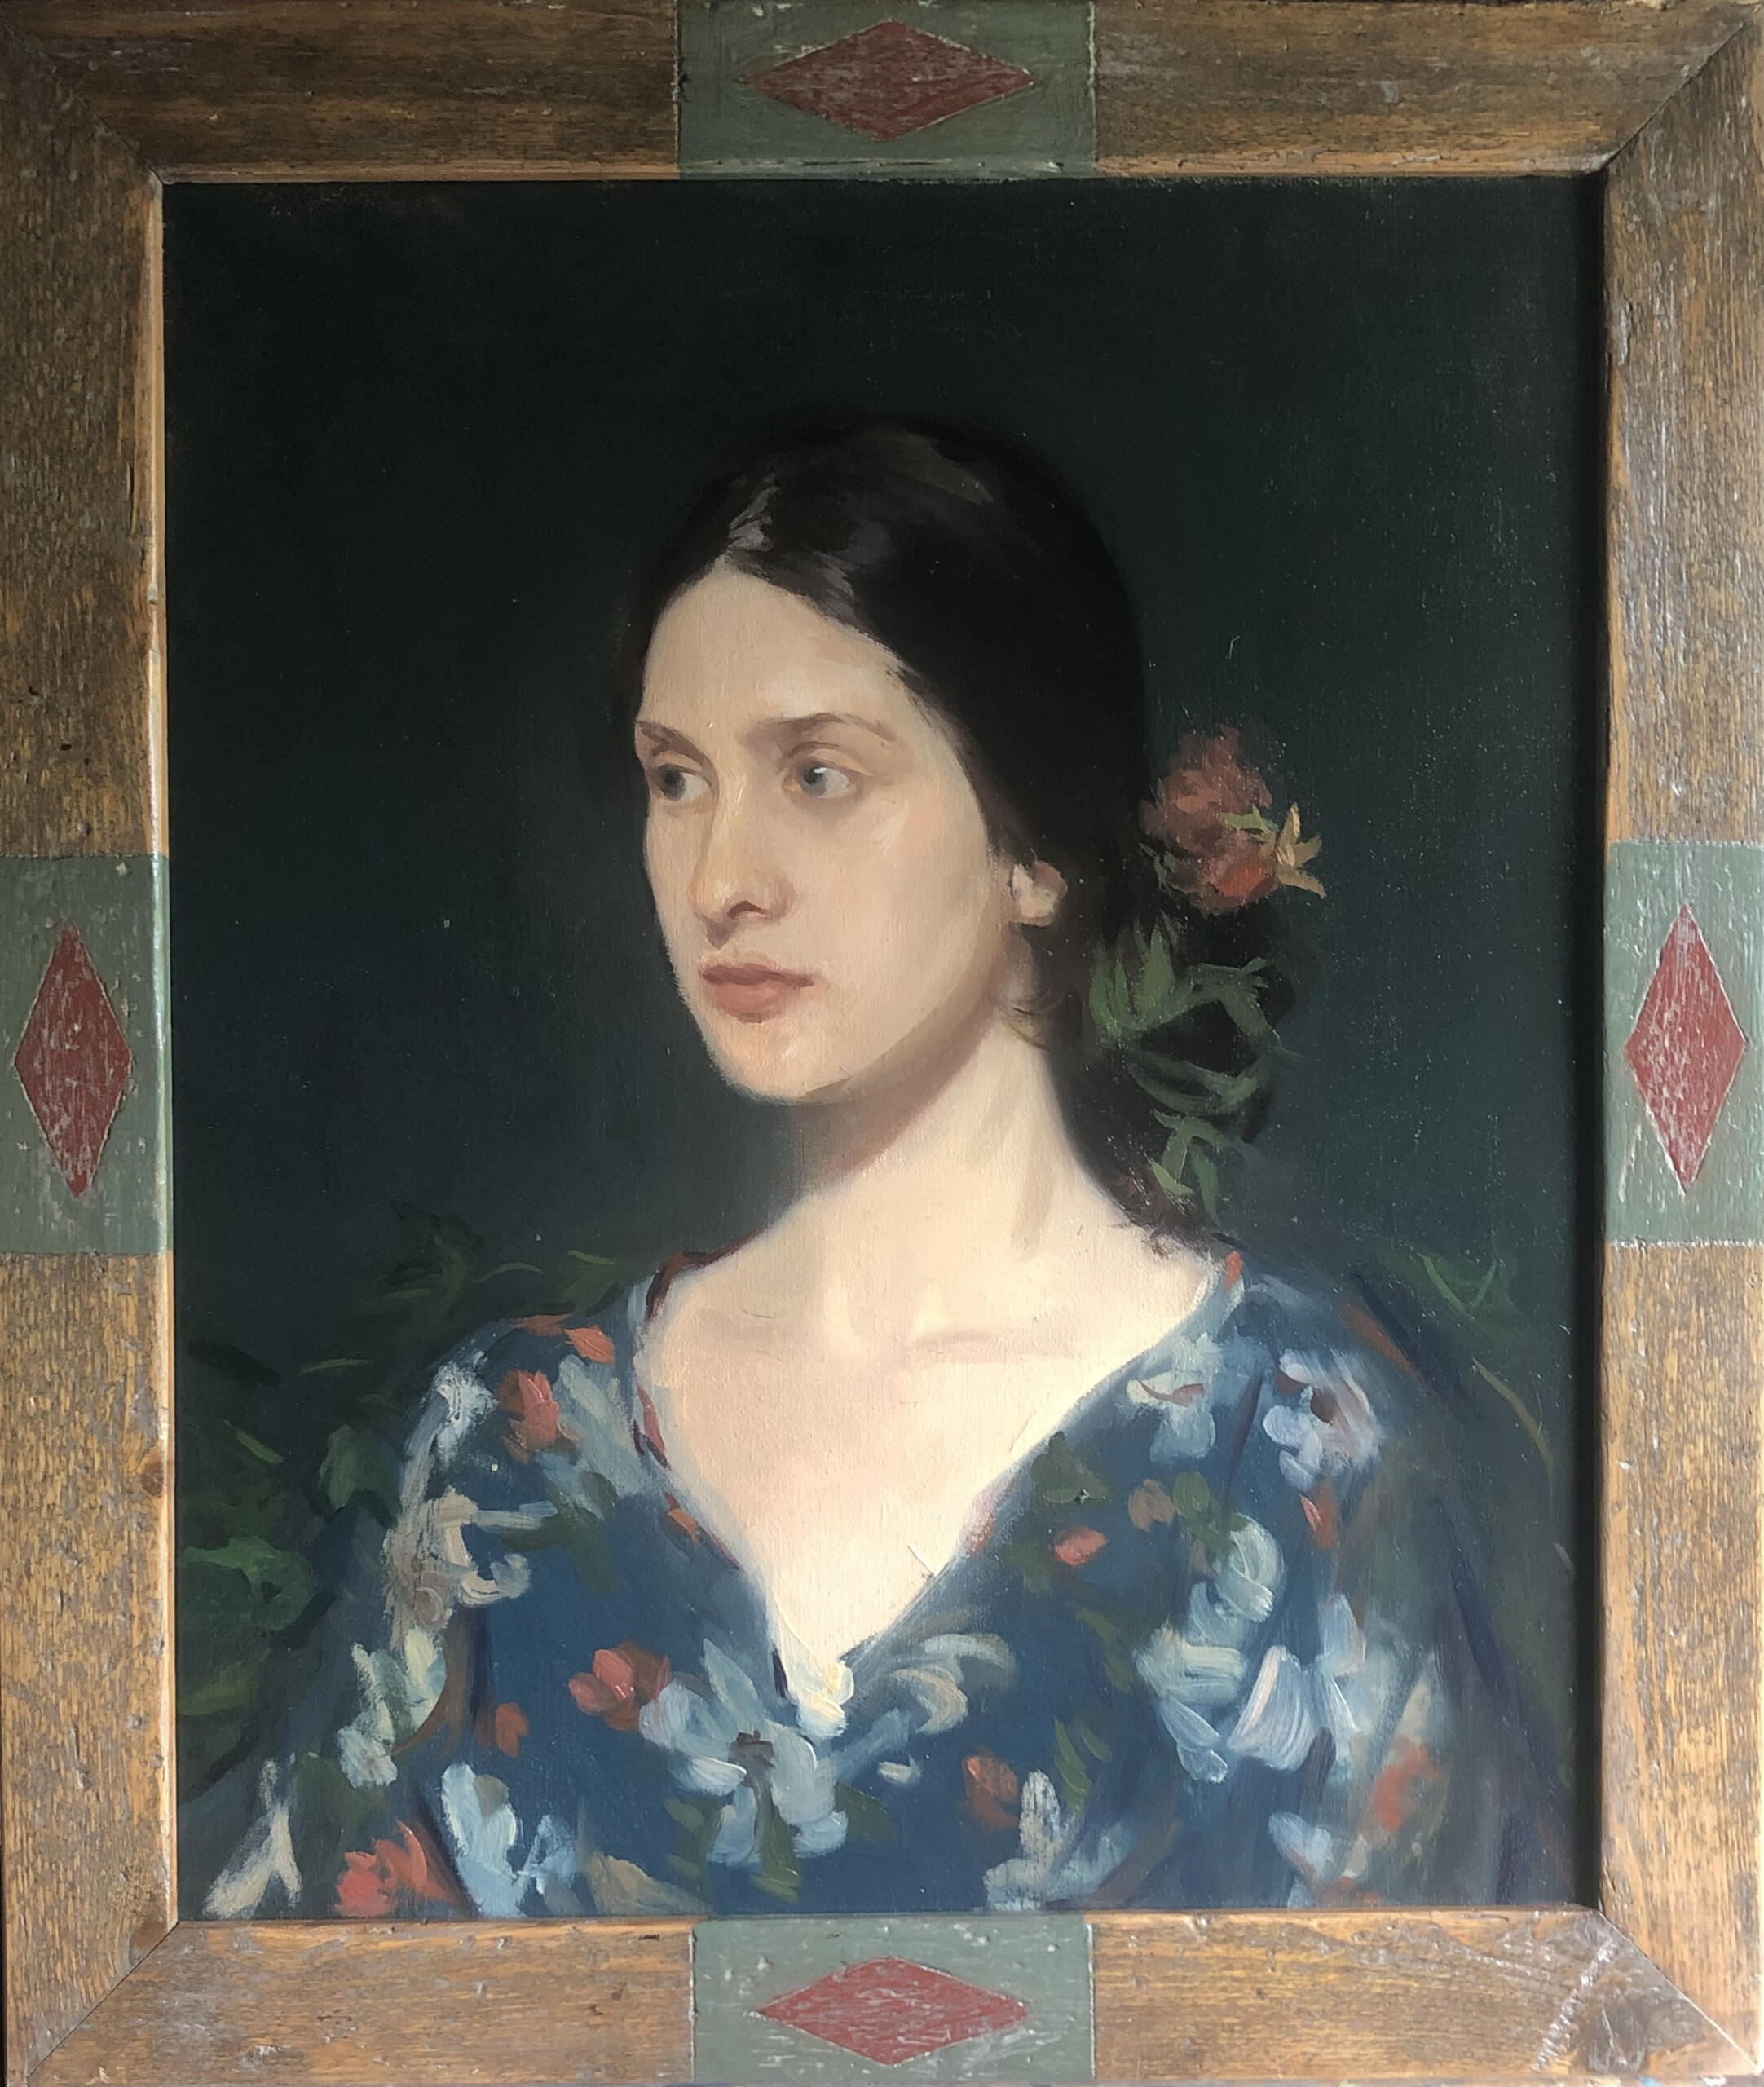 "Caterina as Persephone" in a distressed, wooden frame with a aqua rectangle with a red diamond inside in the center of each side.